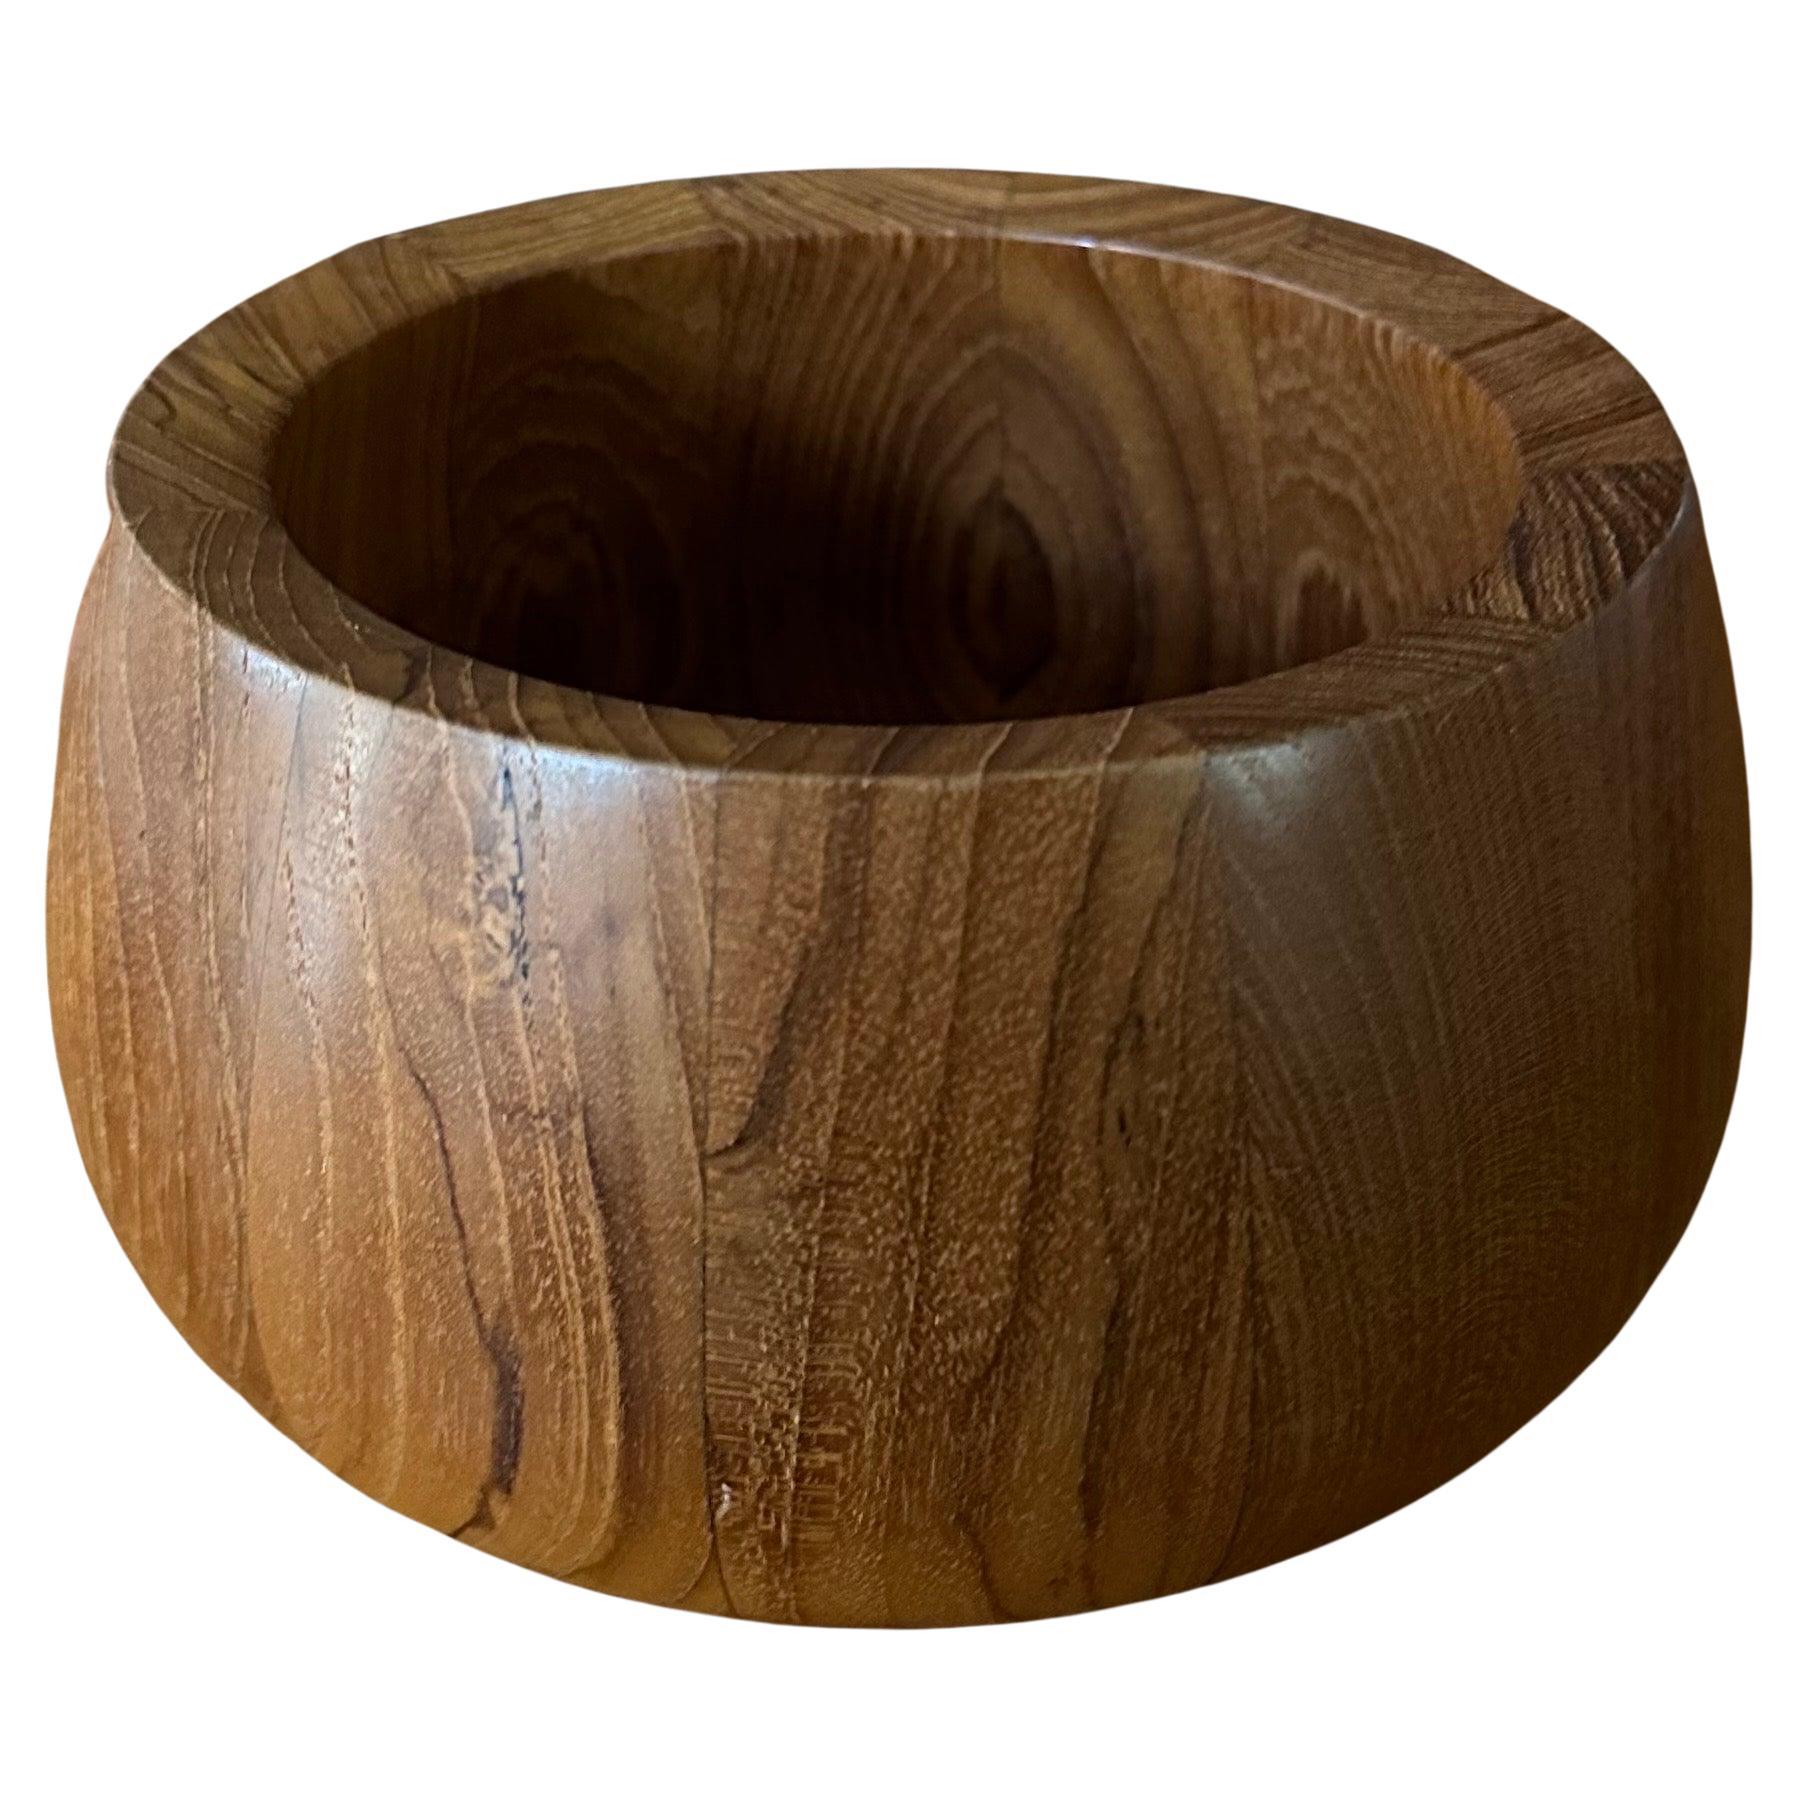 Small Staved Teak Bowl by Jens Quistgaard for Dansk For Sale 4